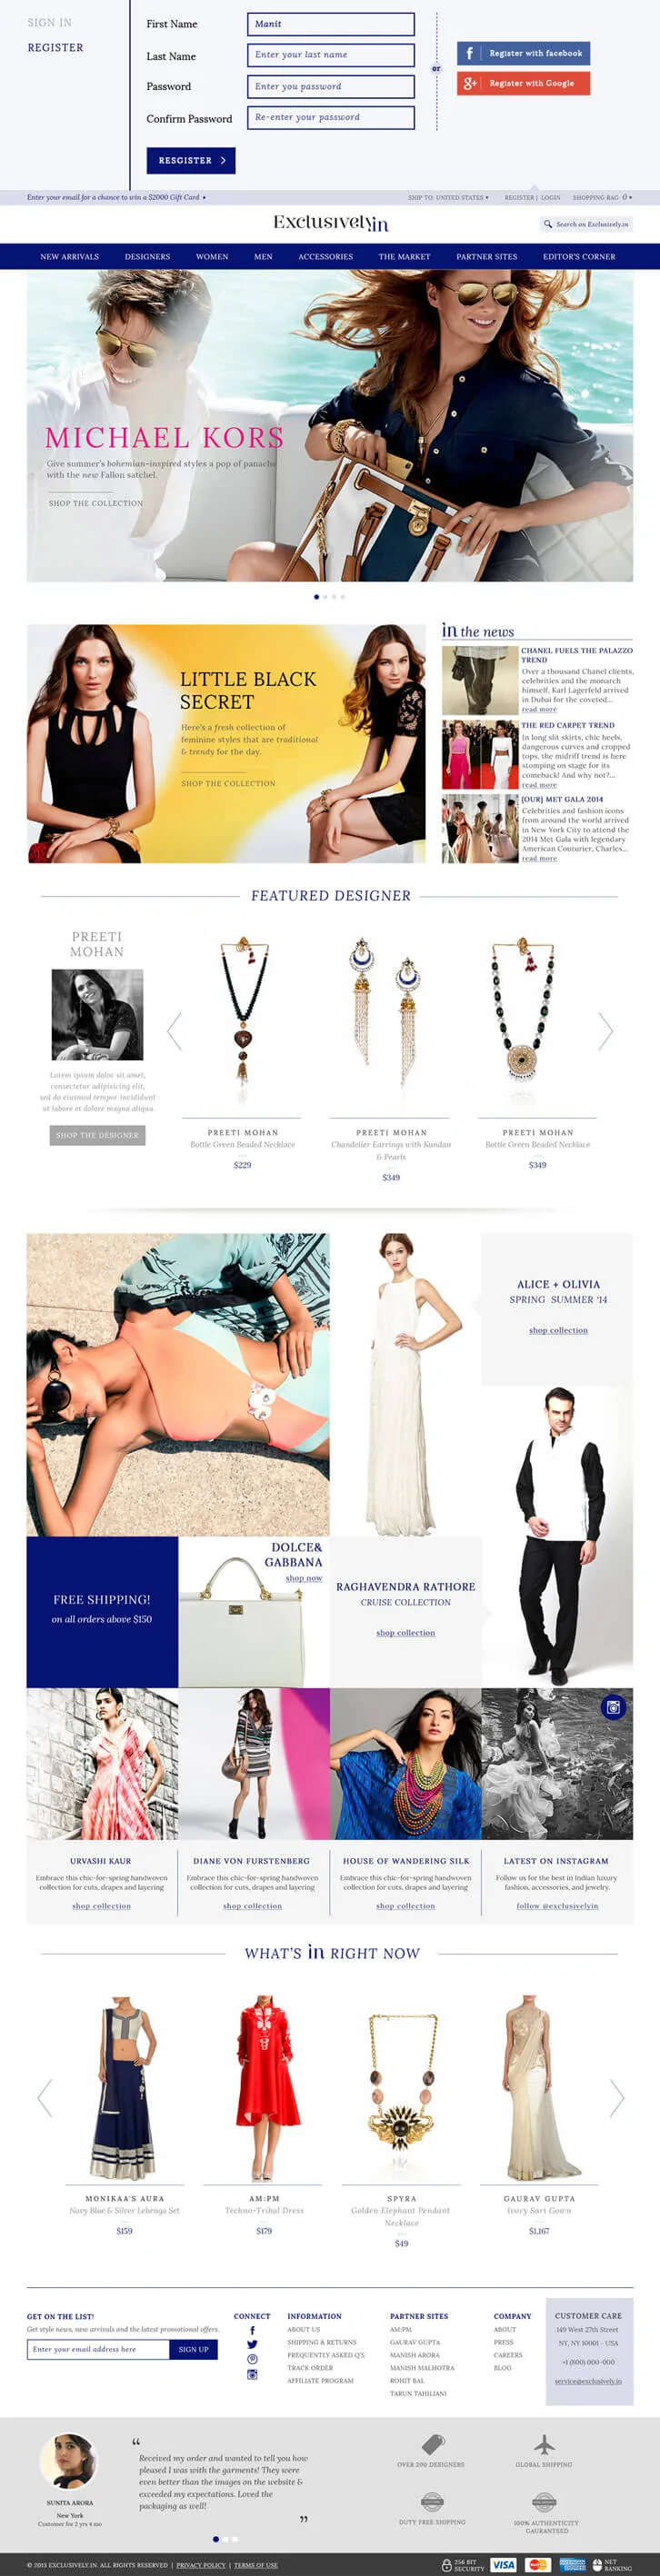 International E-Commerce Platform to sell Indian Fashion Designers Products - Exclusively.in